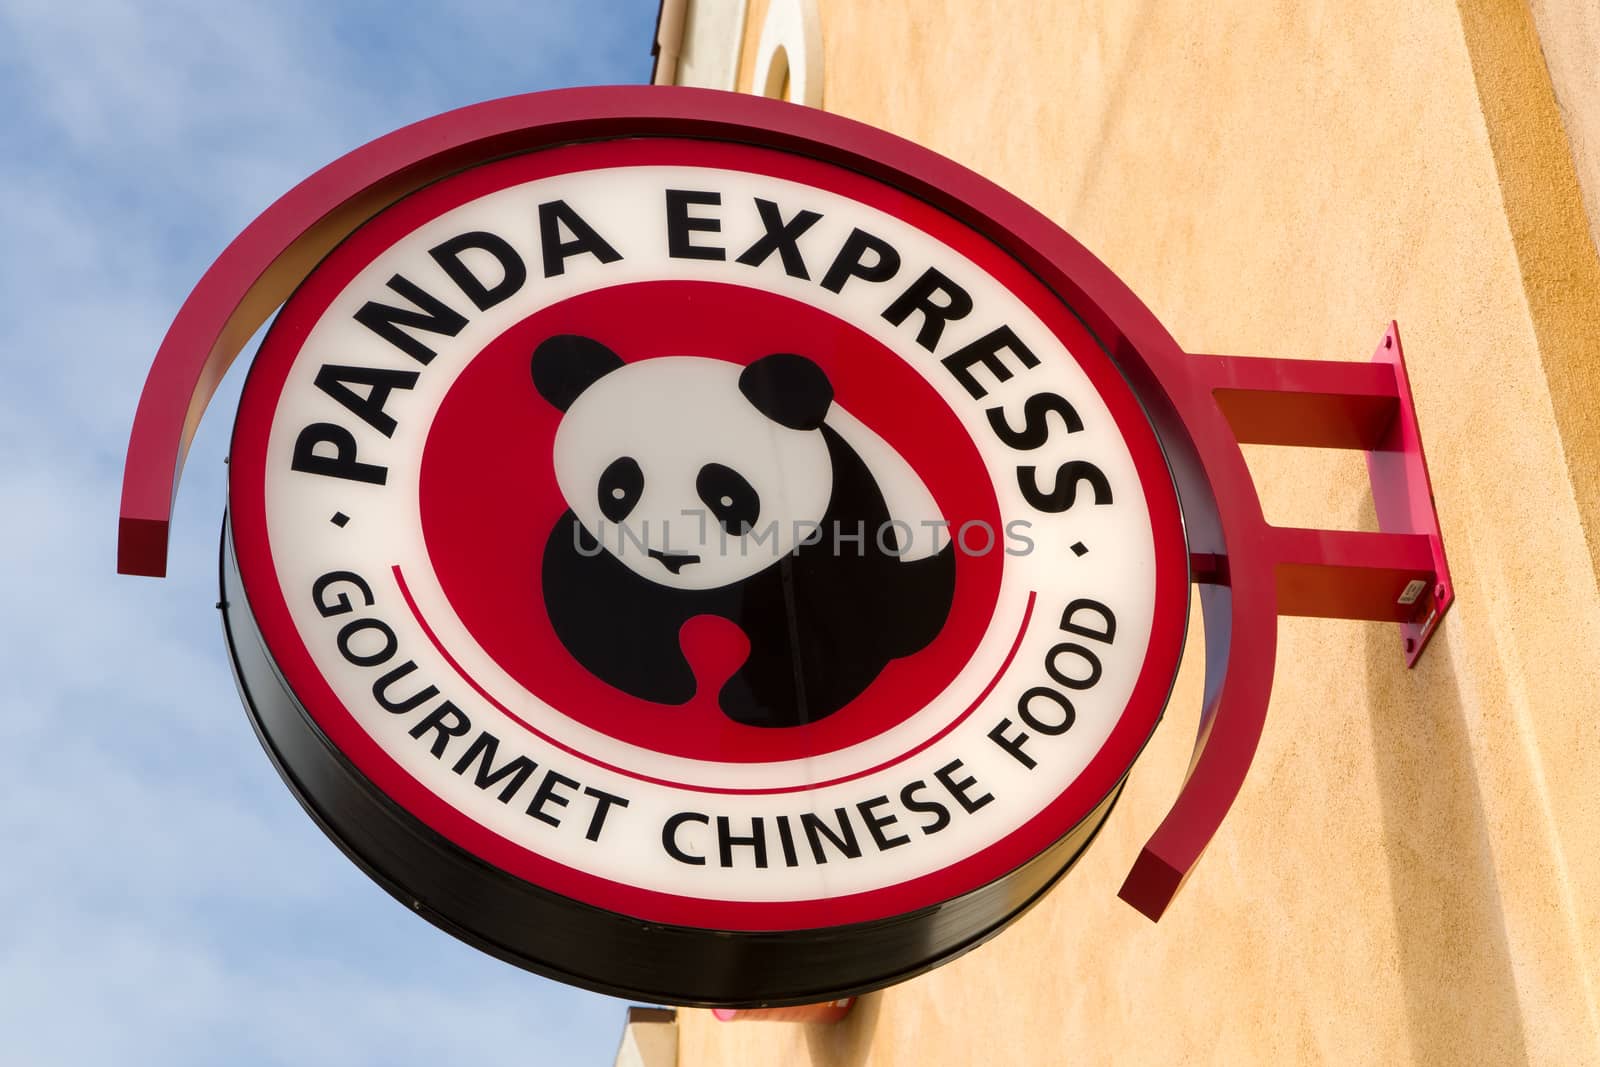 Panda Express Exterior and Logo.  by wolterk